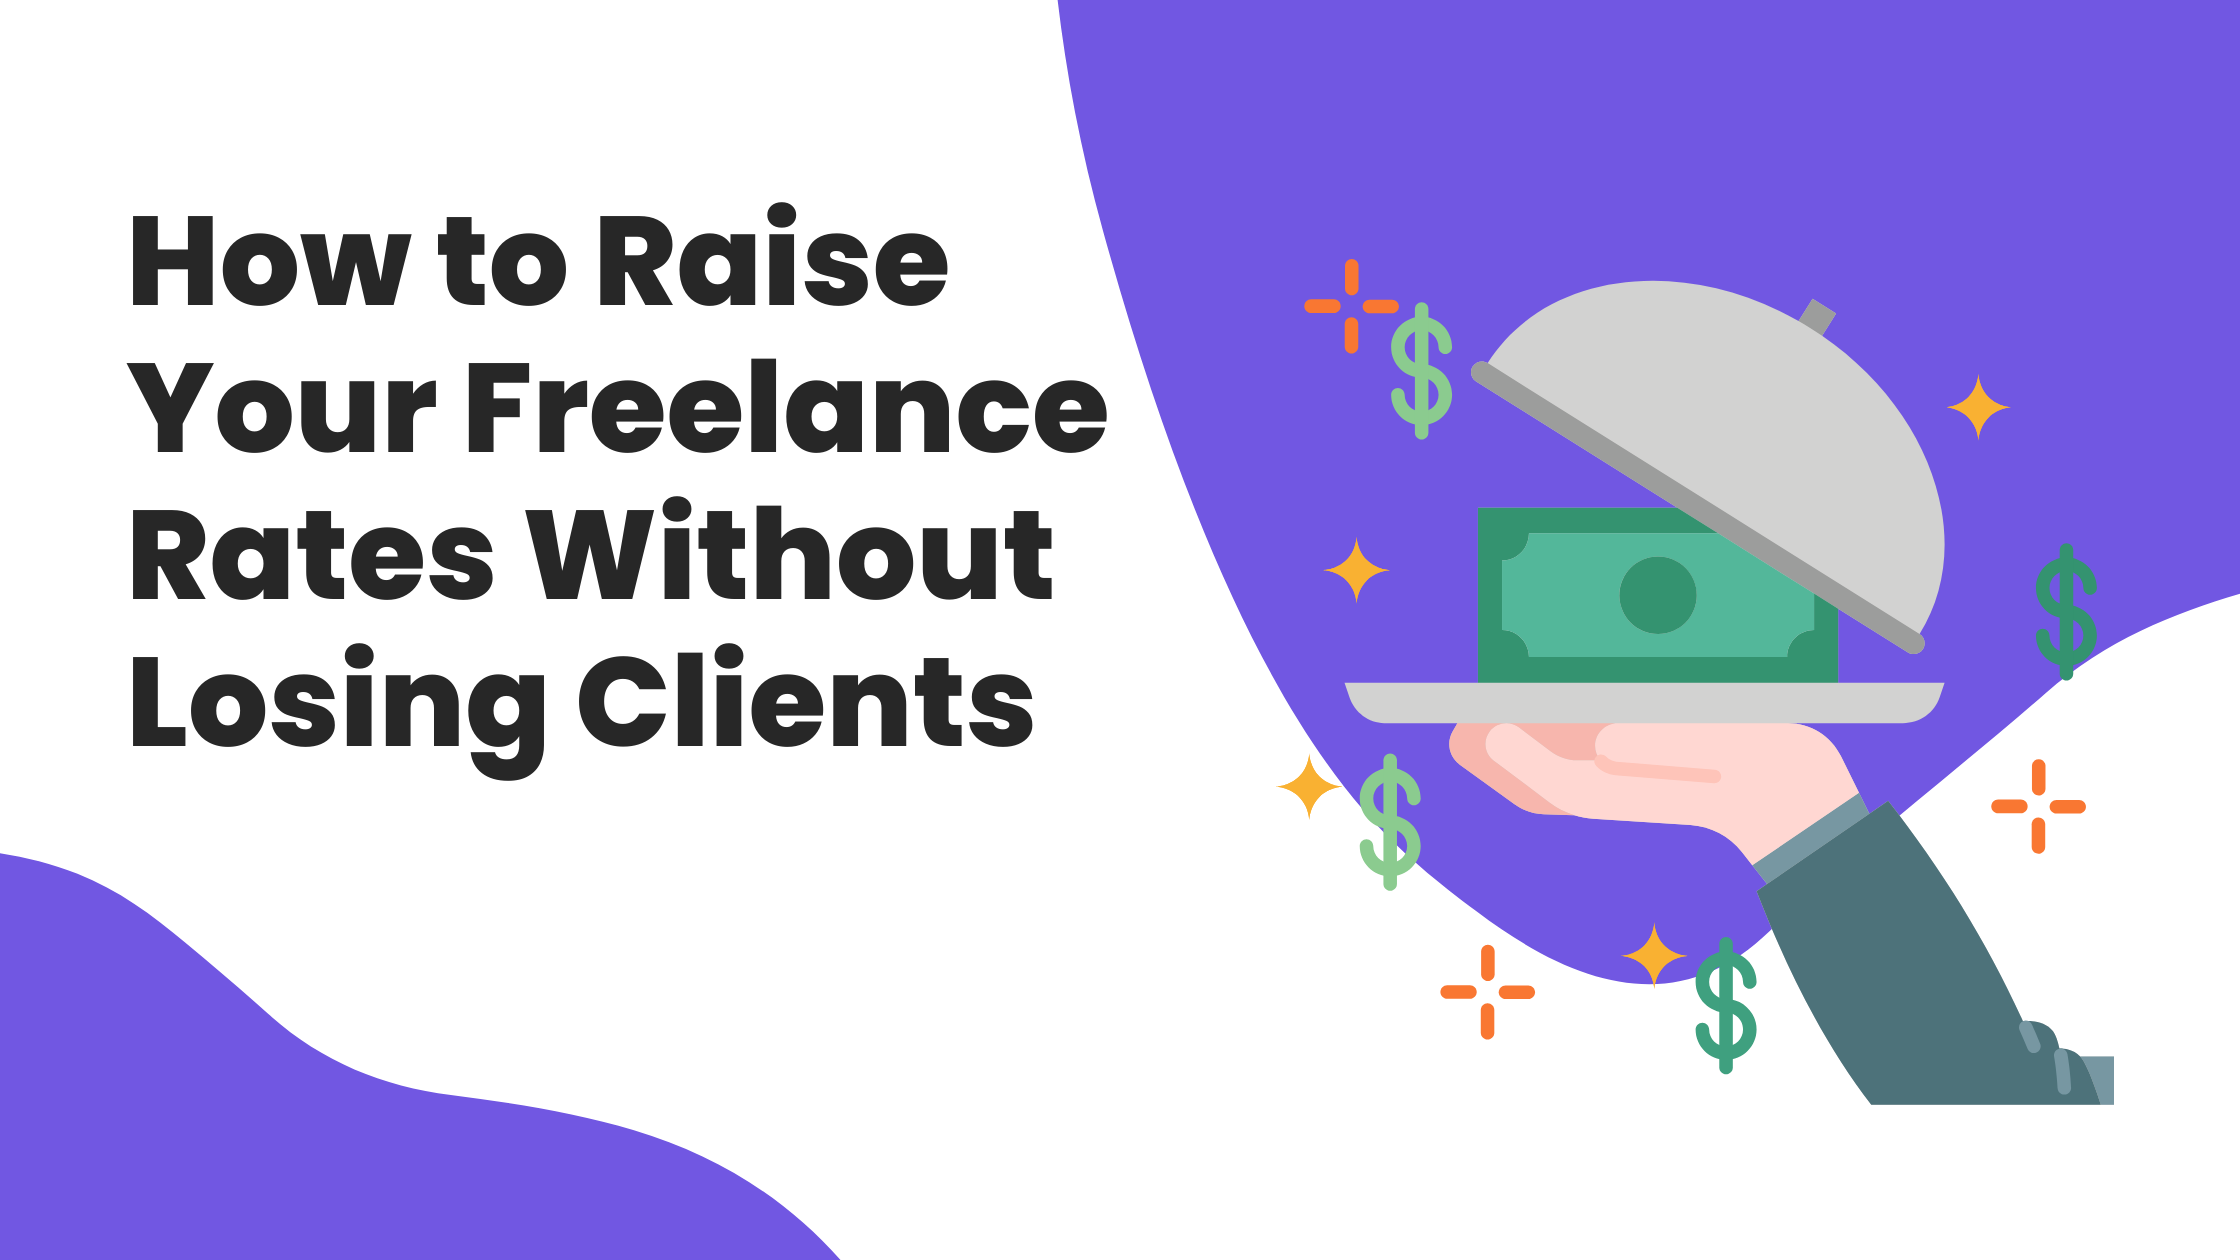 How to Raise Your Freelance Rates Without Losing Clients